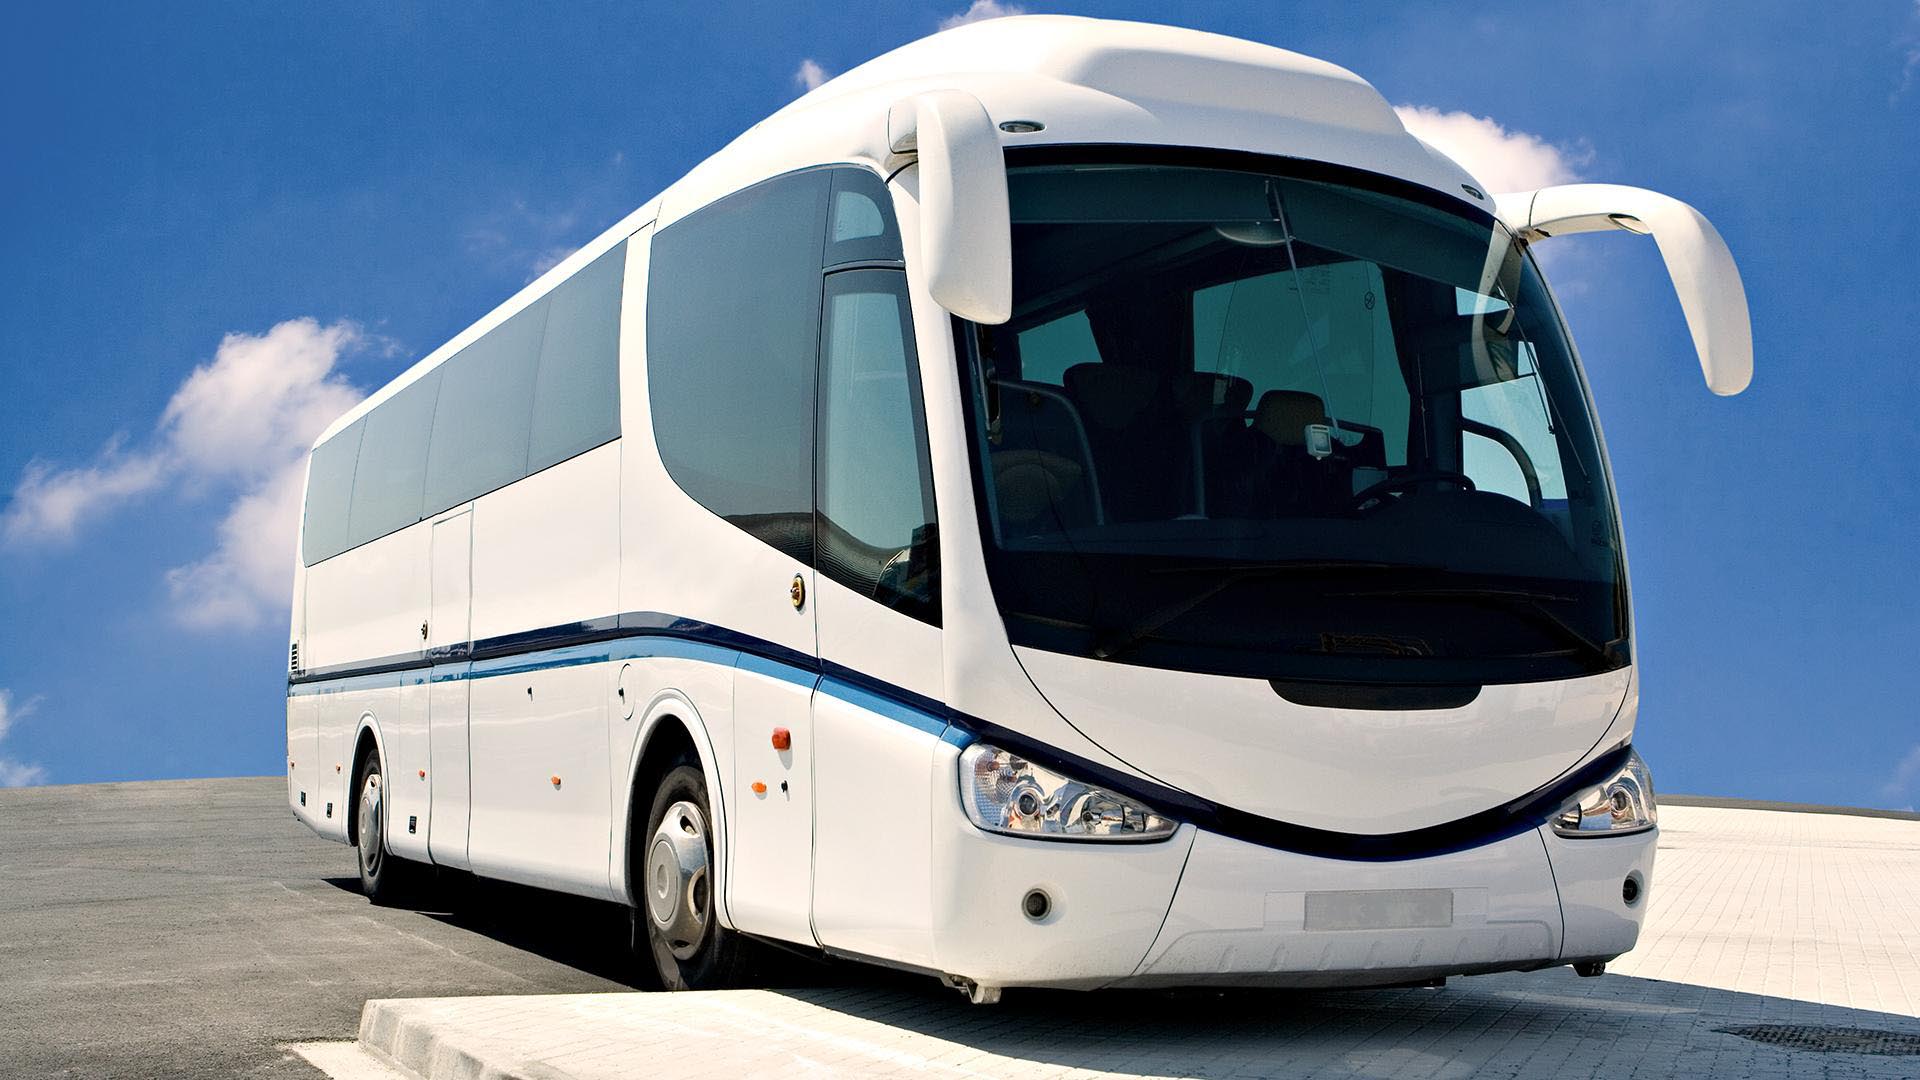 Volvo Bus Price In India 2020 Wallpaper | Volvo, Commercial vehicle, Bus